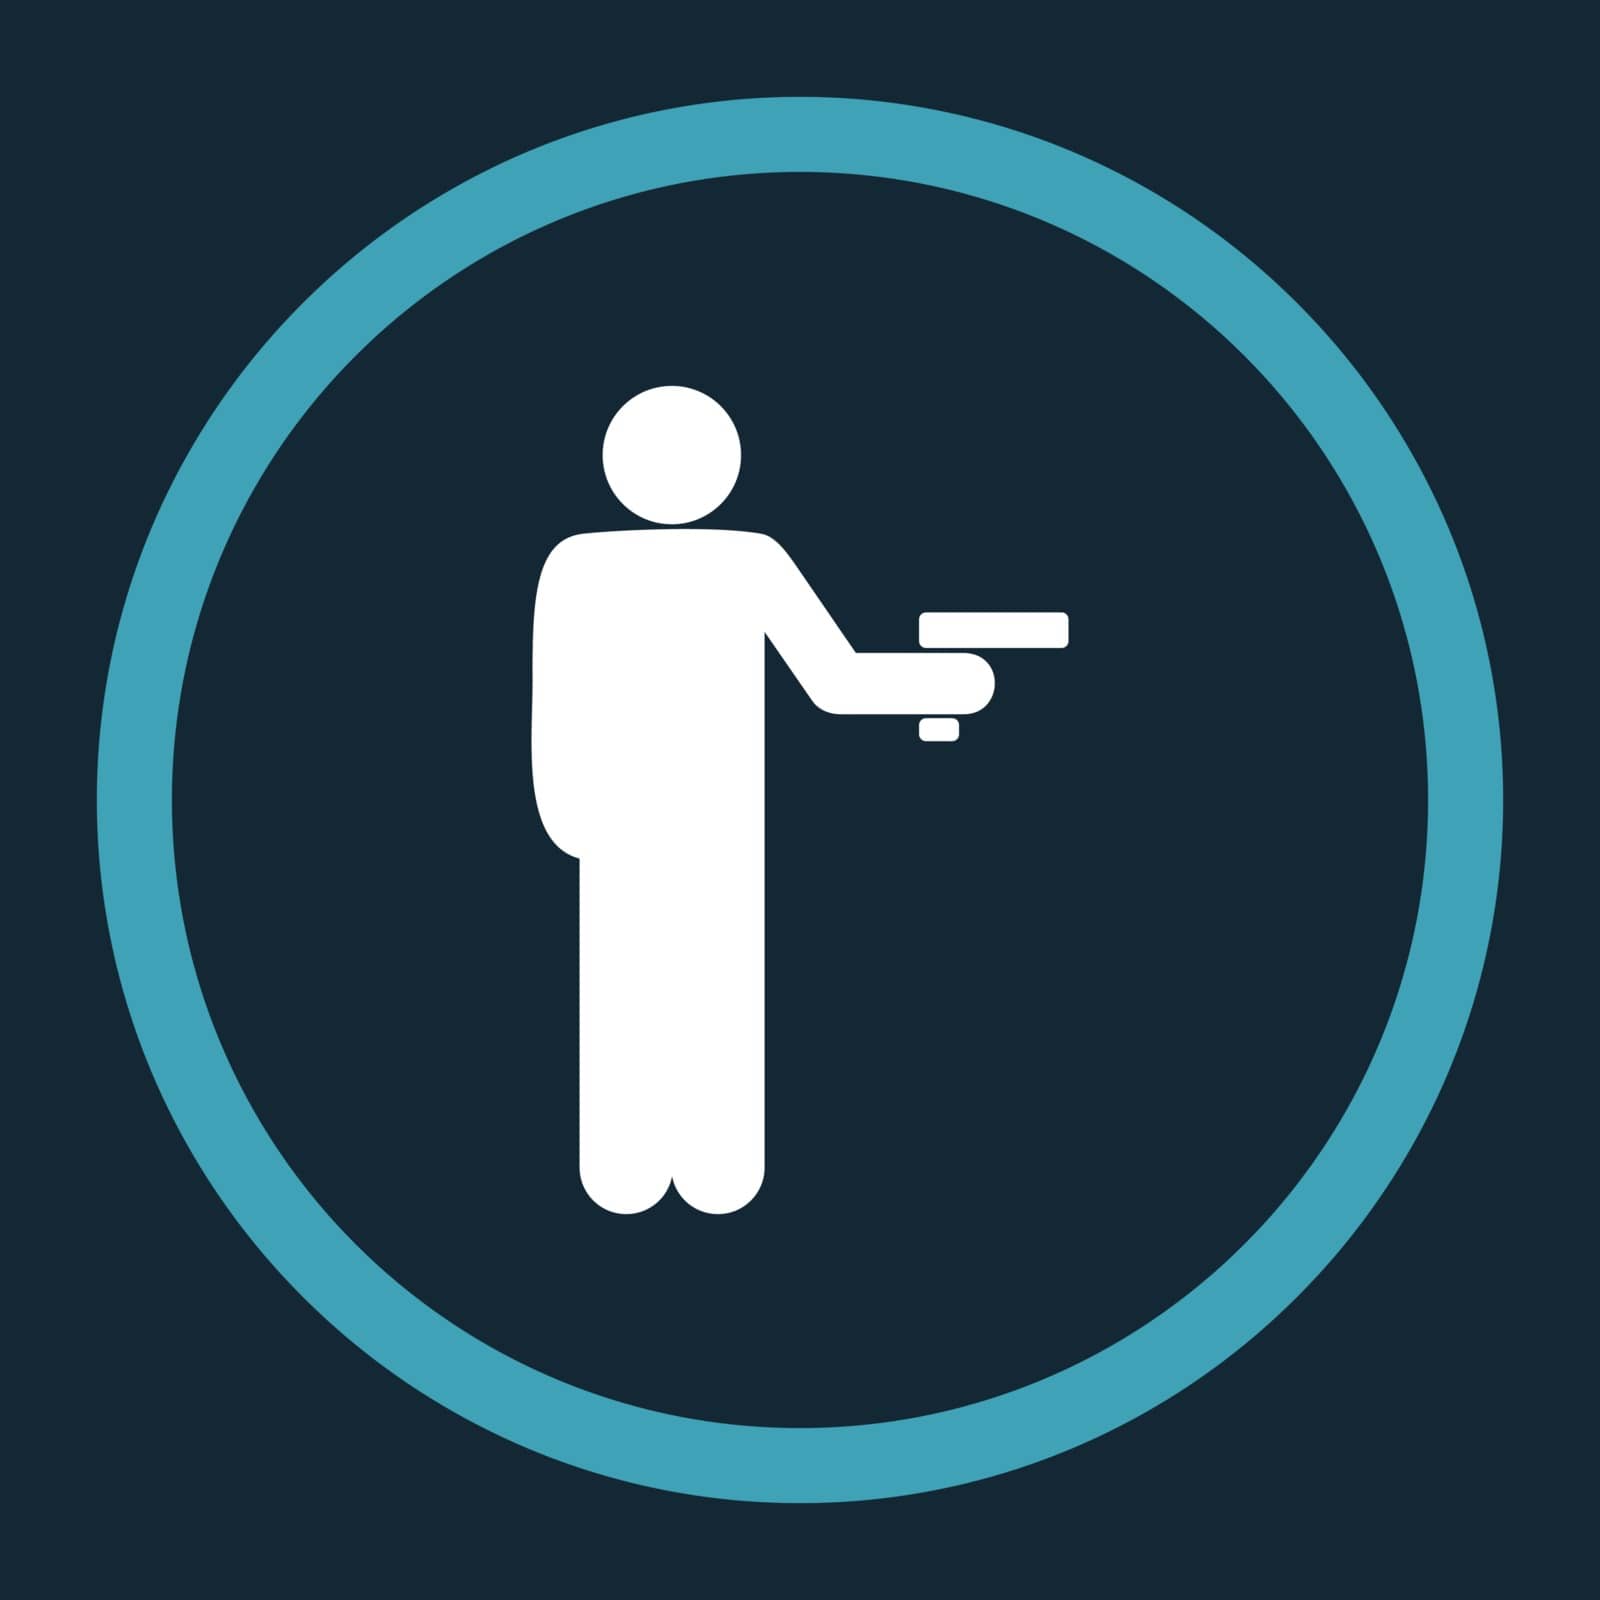 Robbery vector icon. This rounded flat symbol is drawn with blue and white colors on a dark blue background.